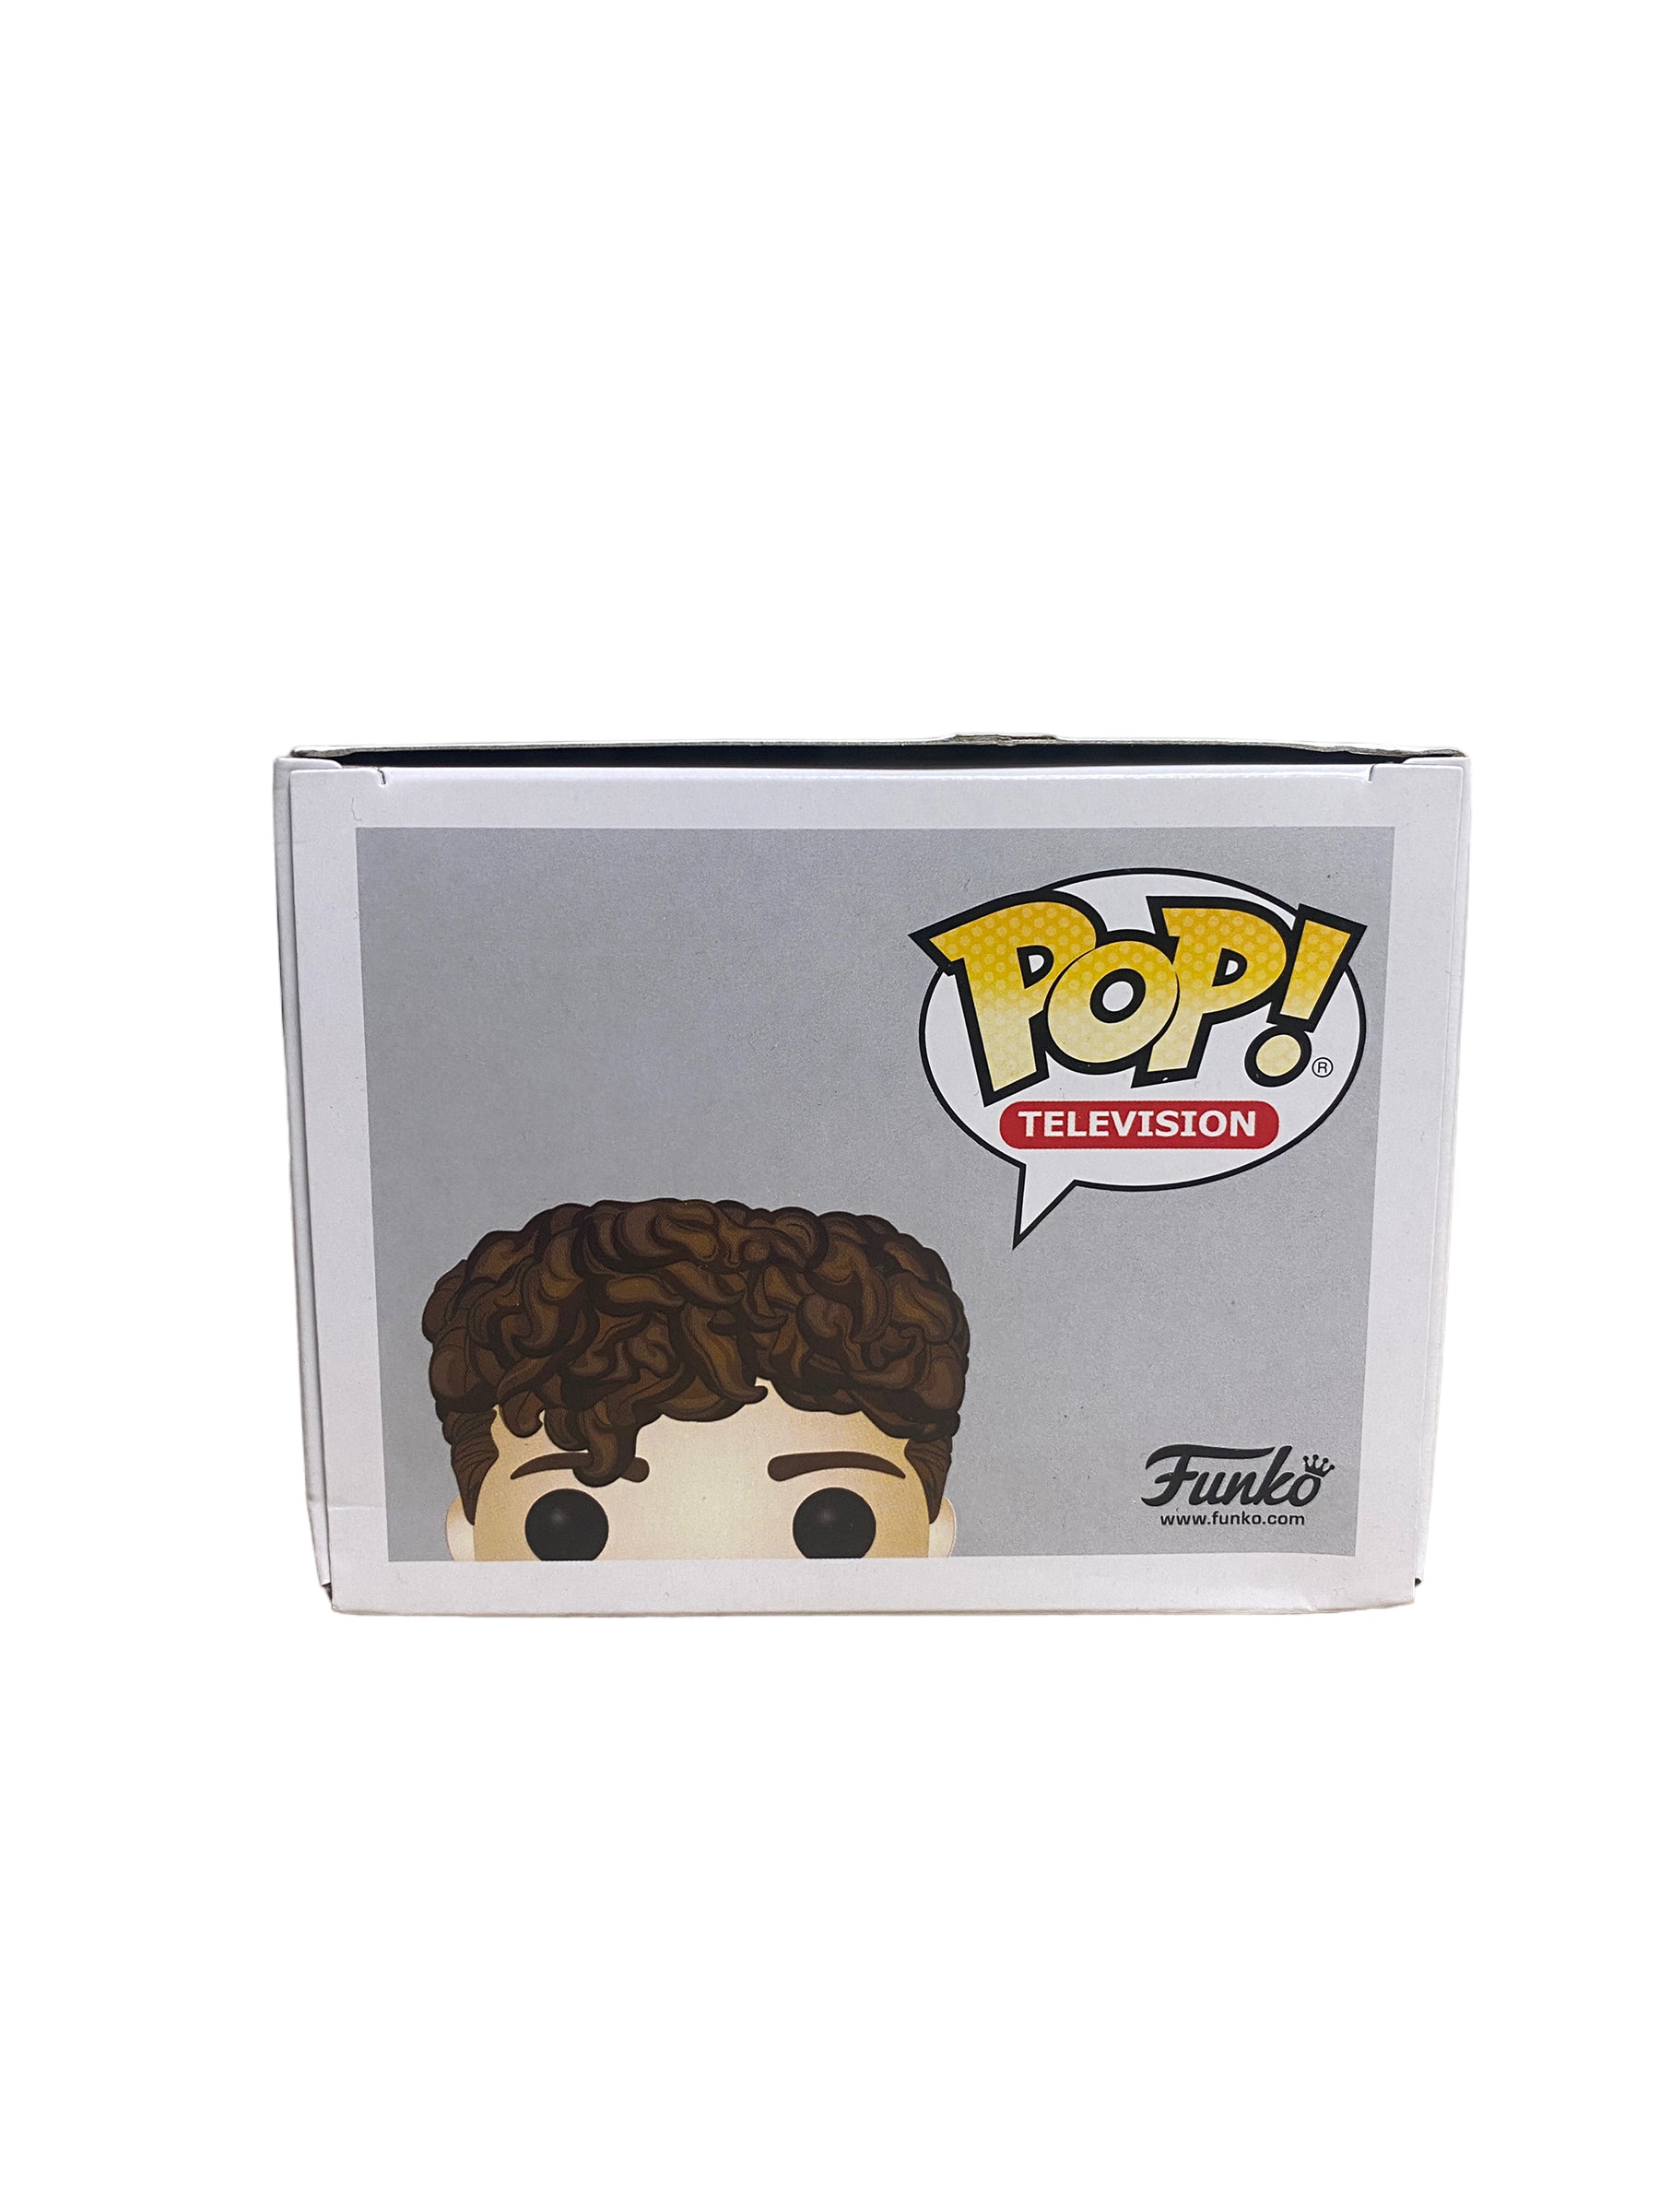 Dustin (Snowball Dance) #617 Funko Pop! - Stranger Things - SDCC 2018 Shared Exclusive - Condition 8.5/10